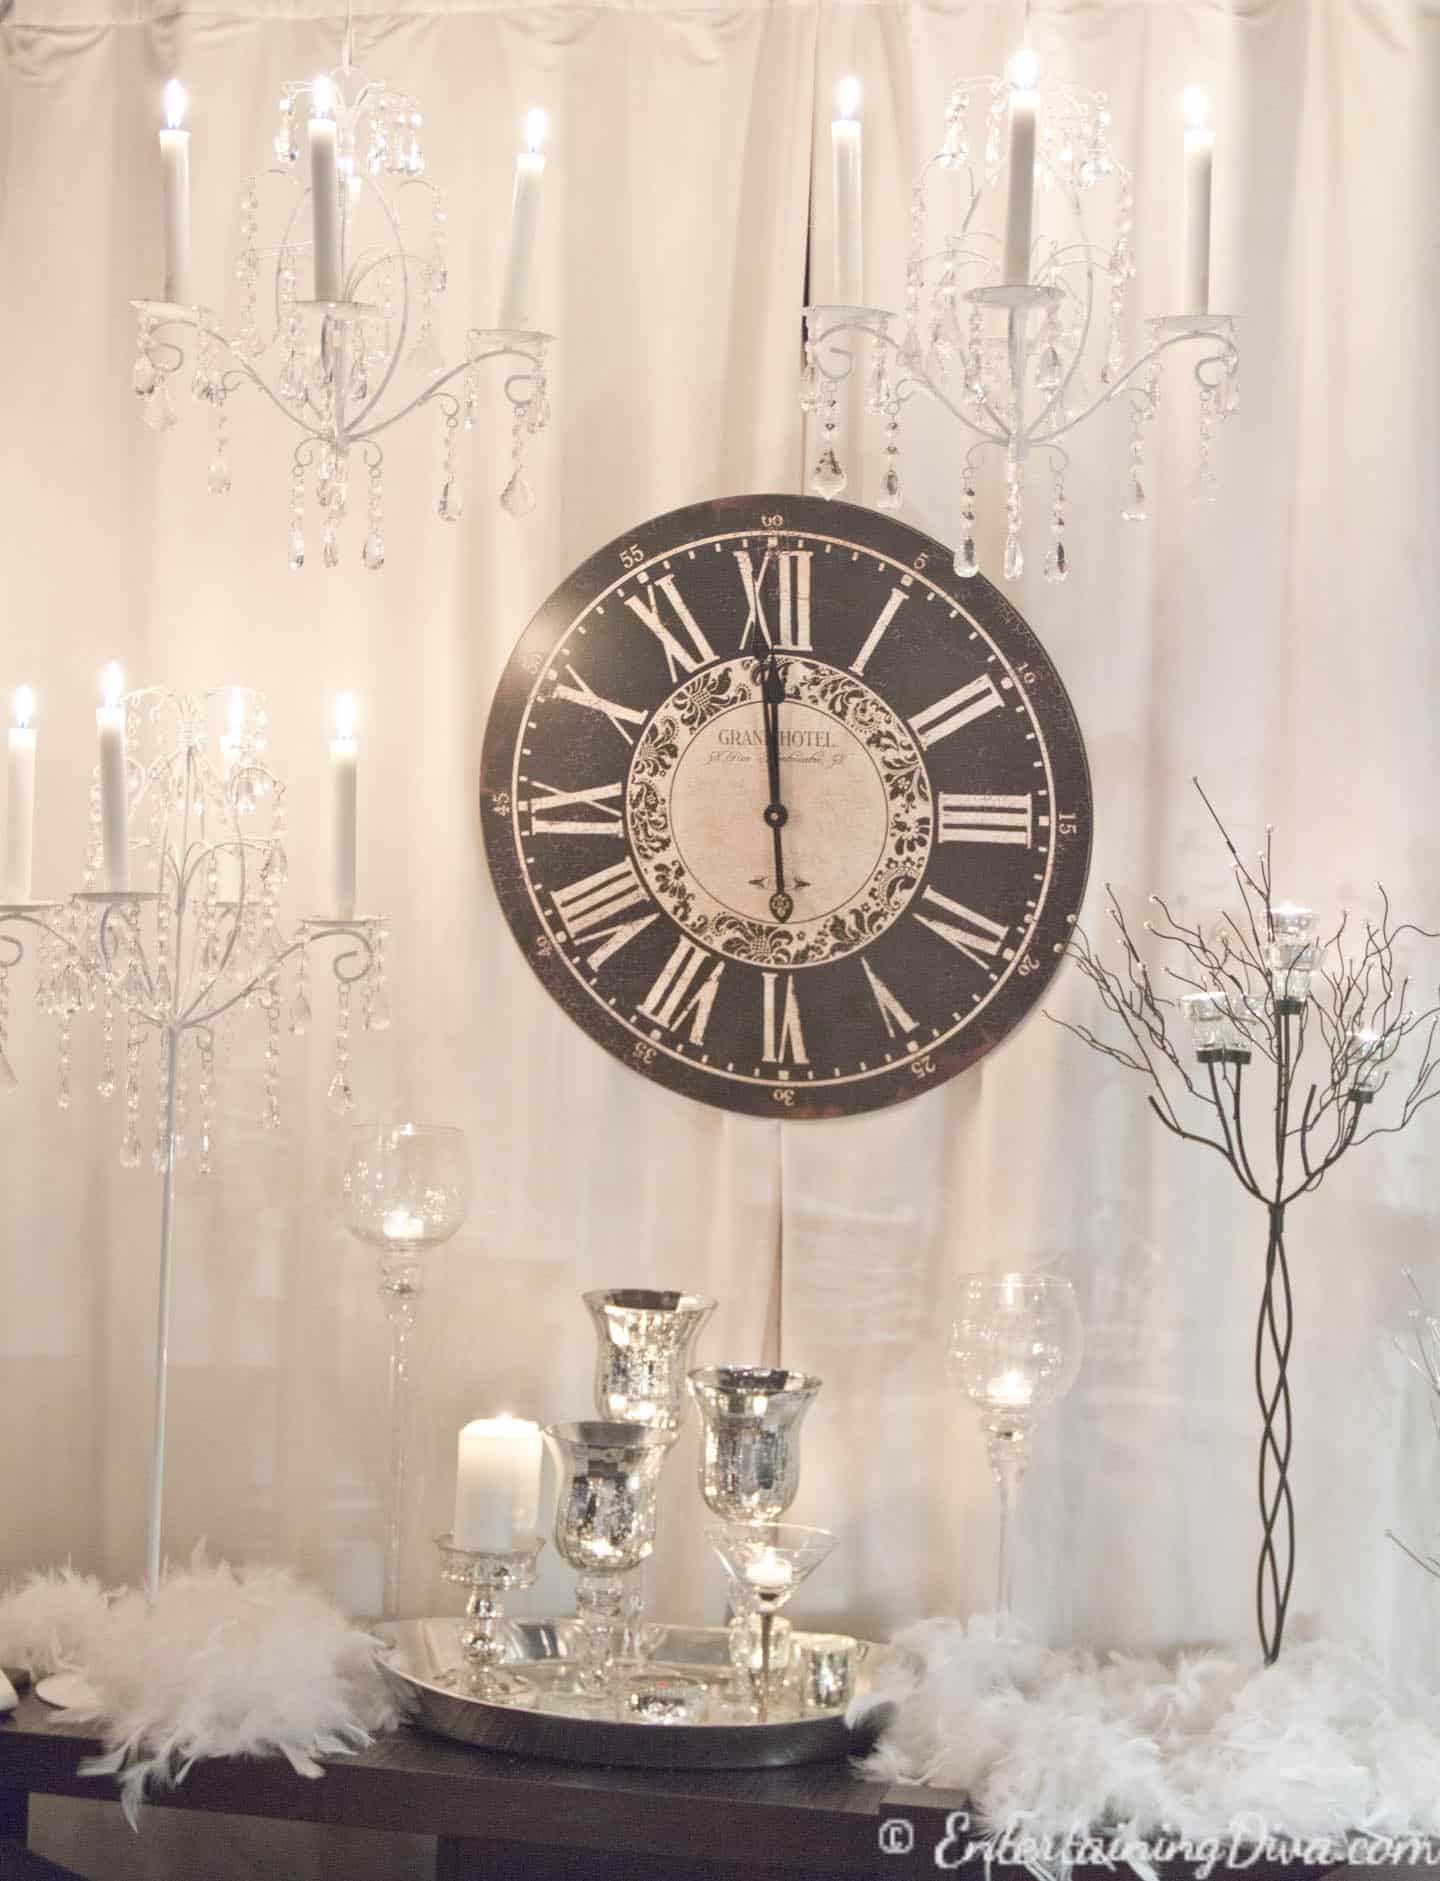 A clock surrounded by candles for a last minute New Year's Eve party decoration